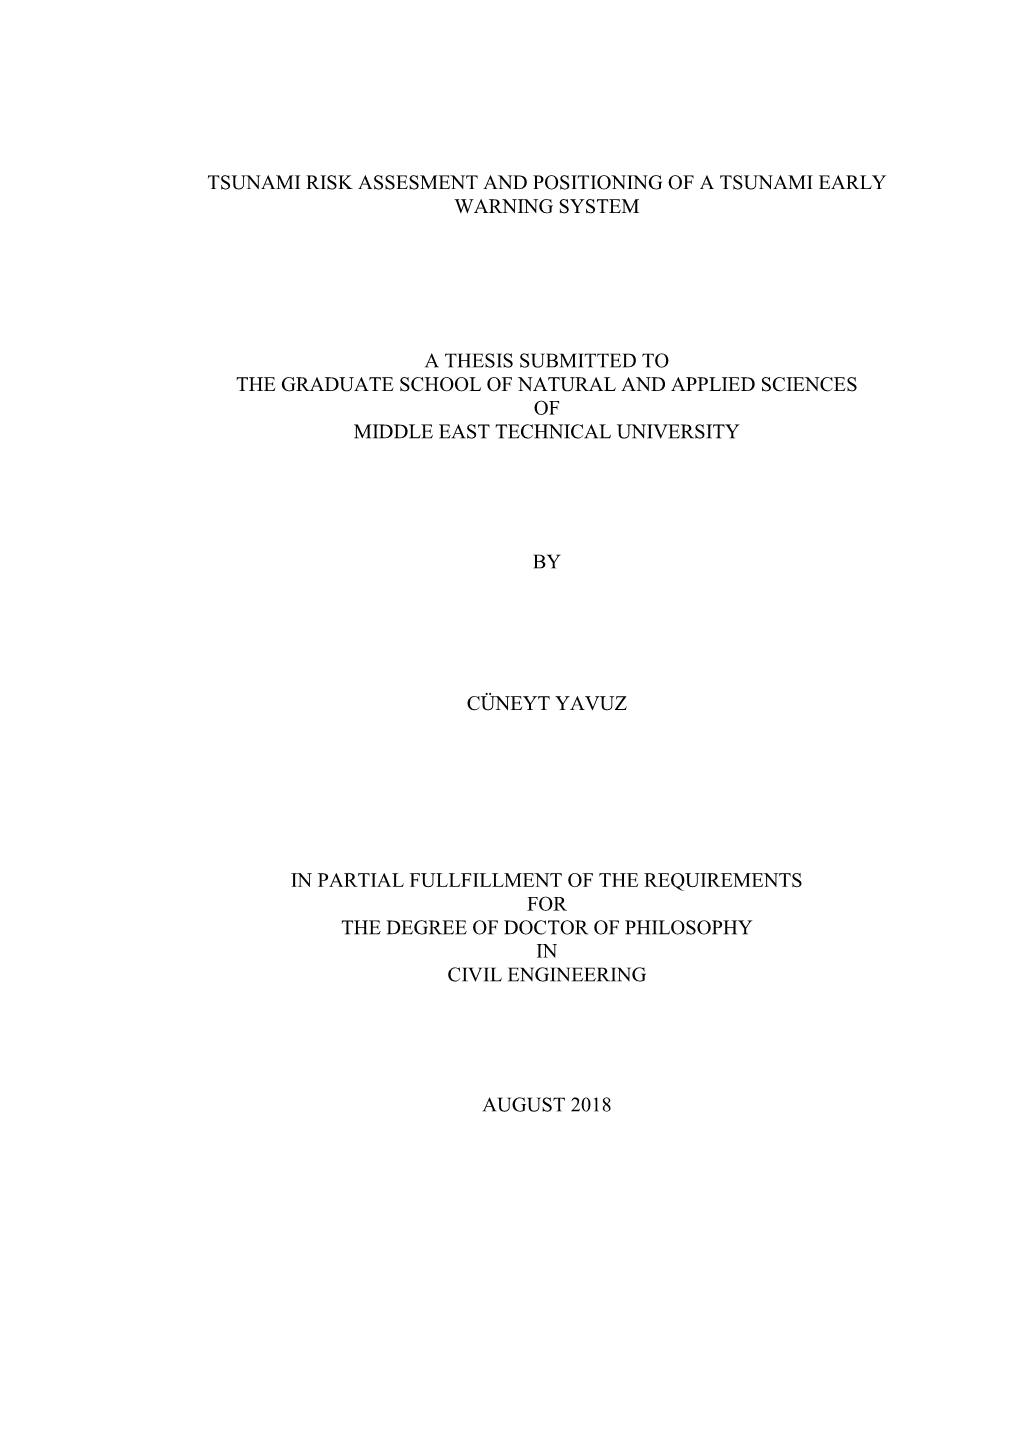 Tsunami Risk Assesment and Positioning of a Tsunami Early Warning System a Thesis Submitted to the Graduate School of Natural An